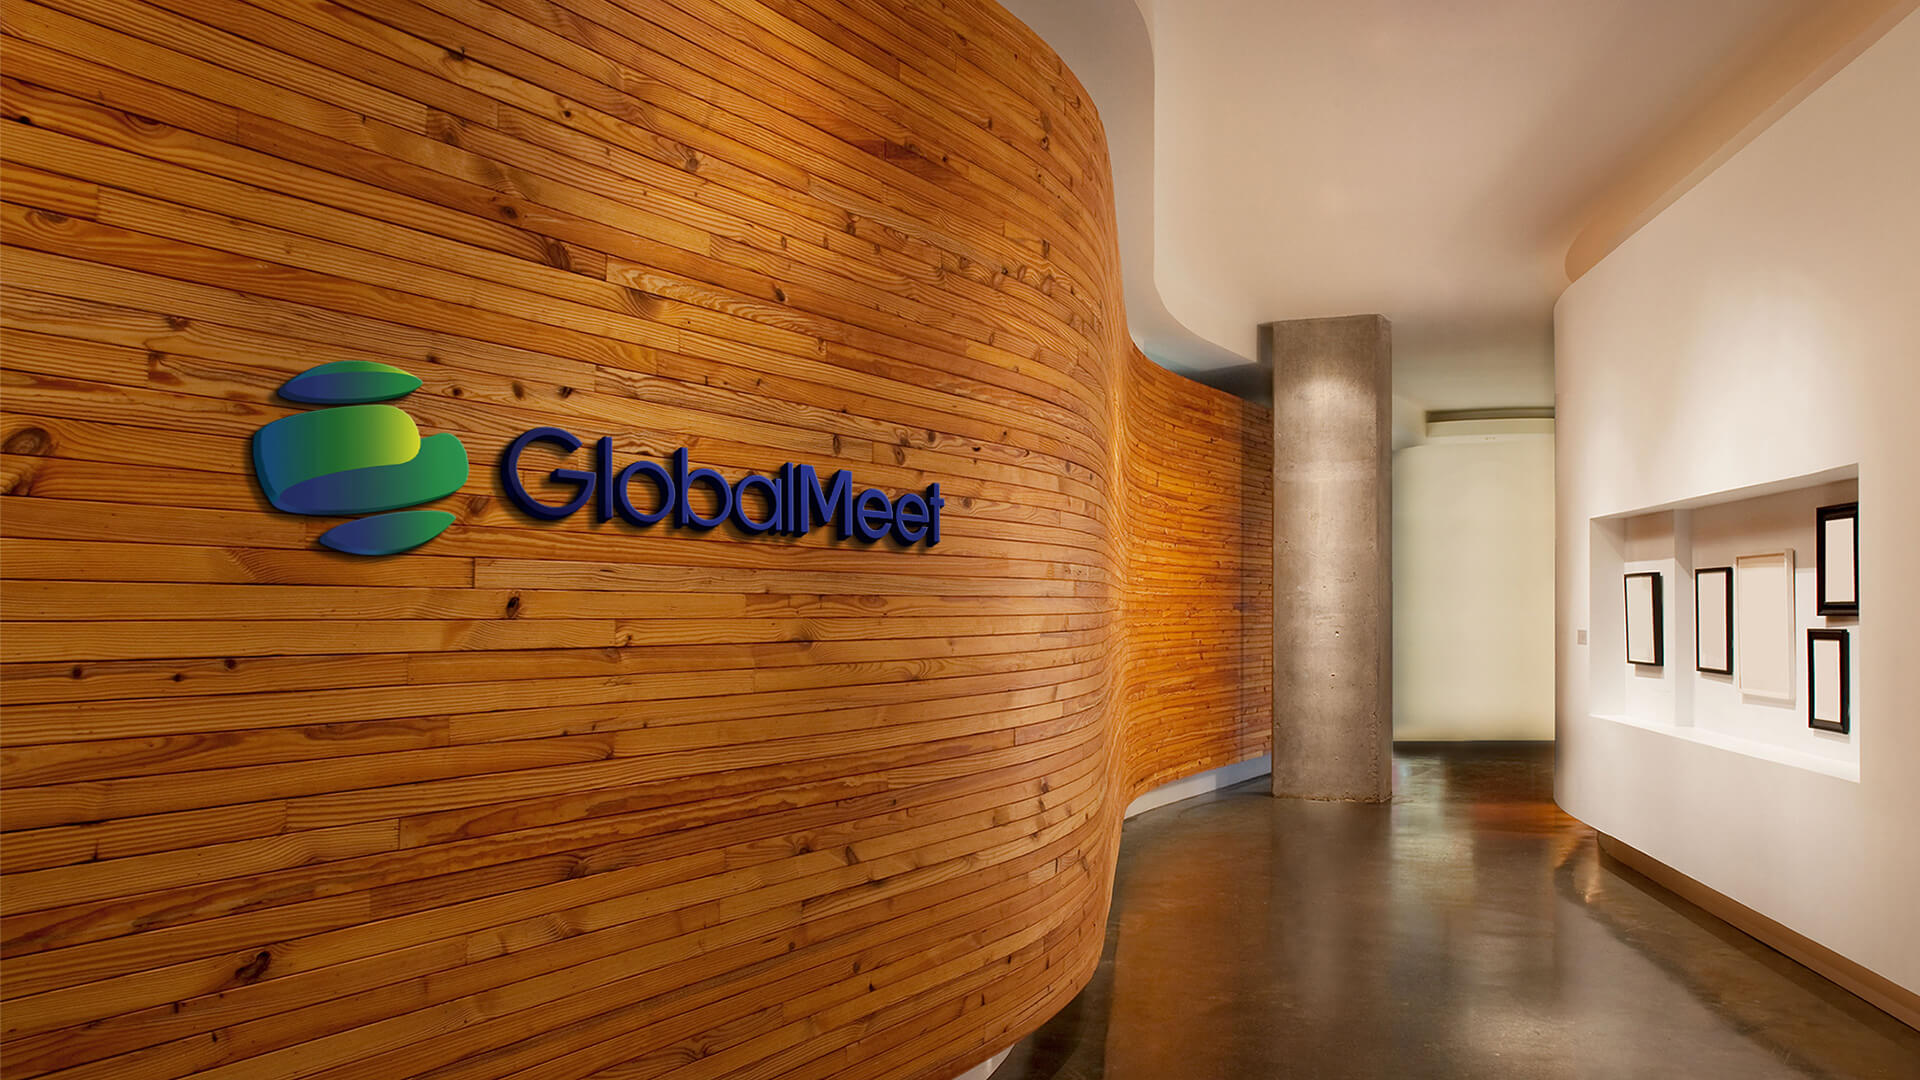 Graphic of a GlobalMeet logo on the side of a wooden wall in an office